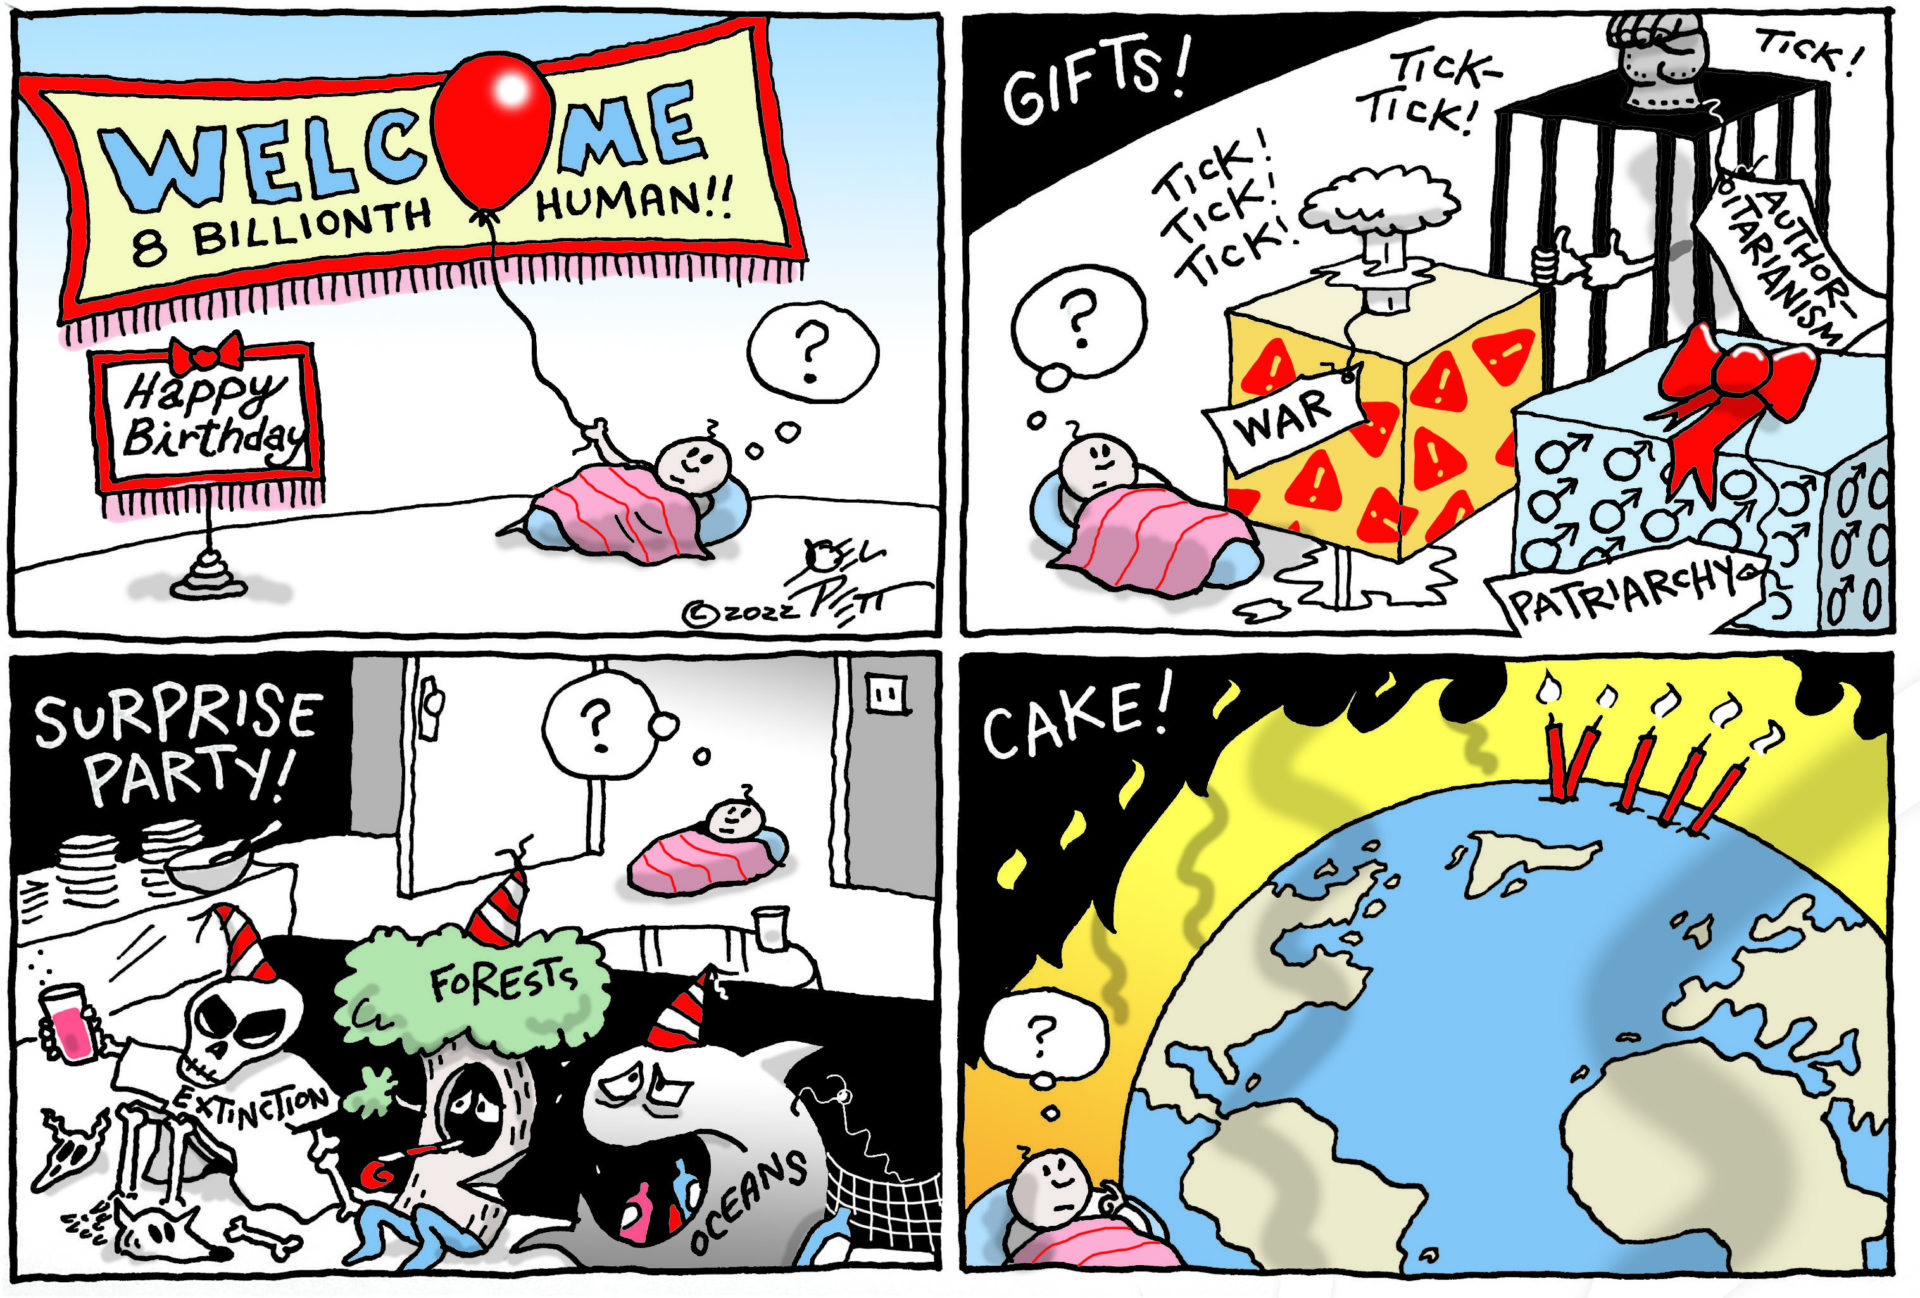 cartoon about 8 billionth baby facing global challenges